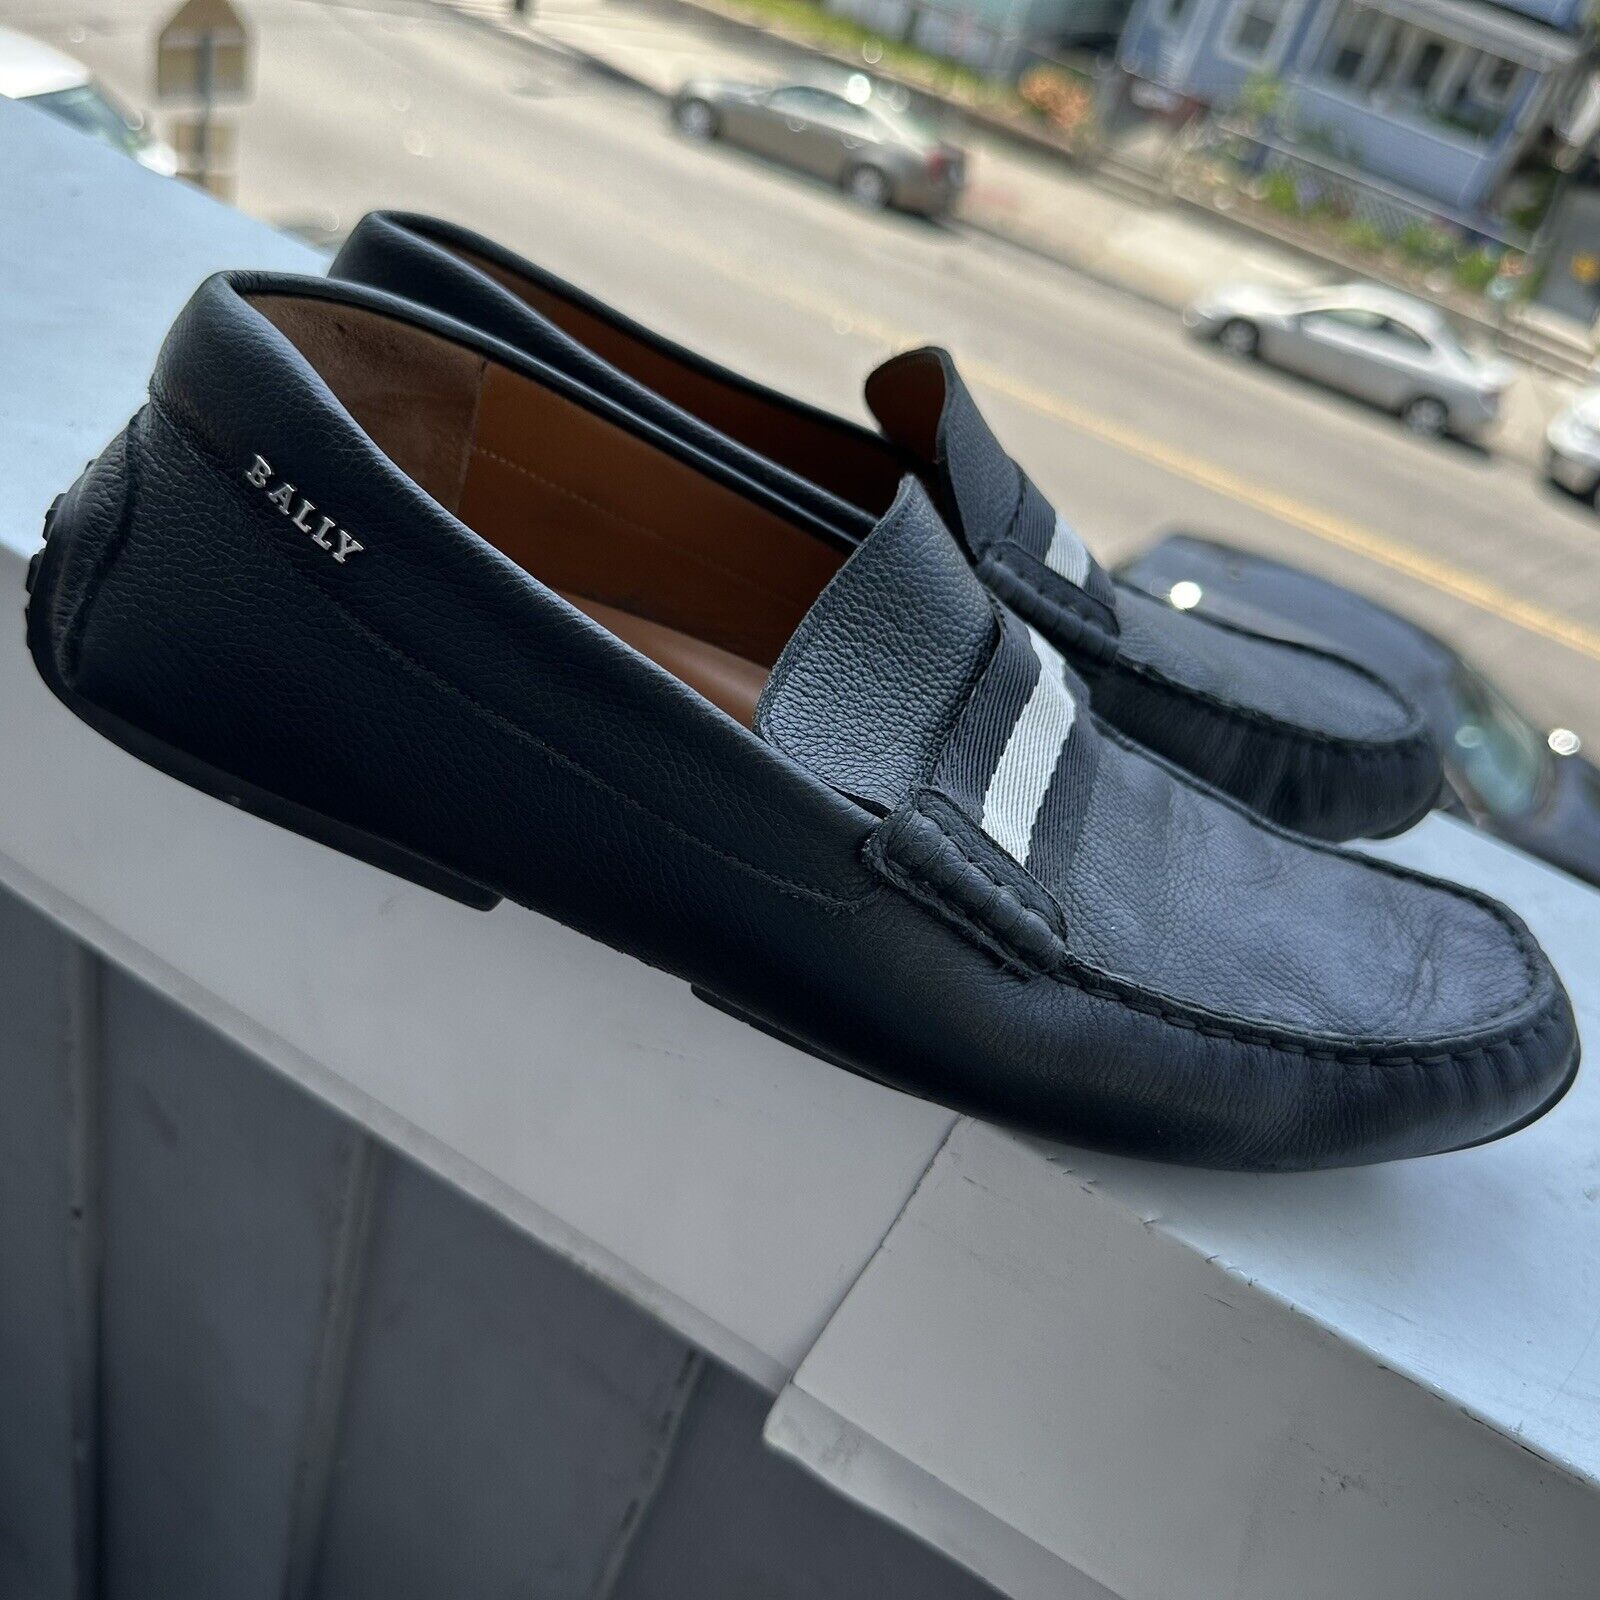 Bally Italy Black Loafer  Driving Shoes Size 9.5 E